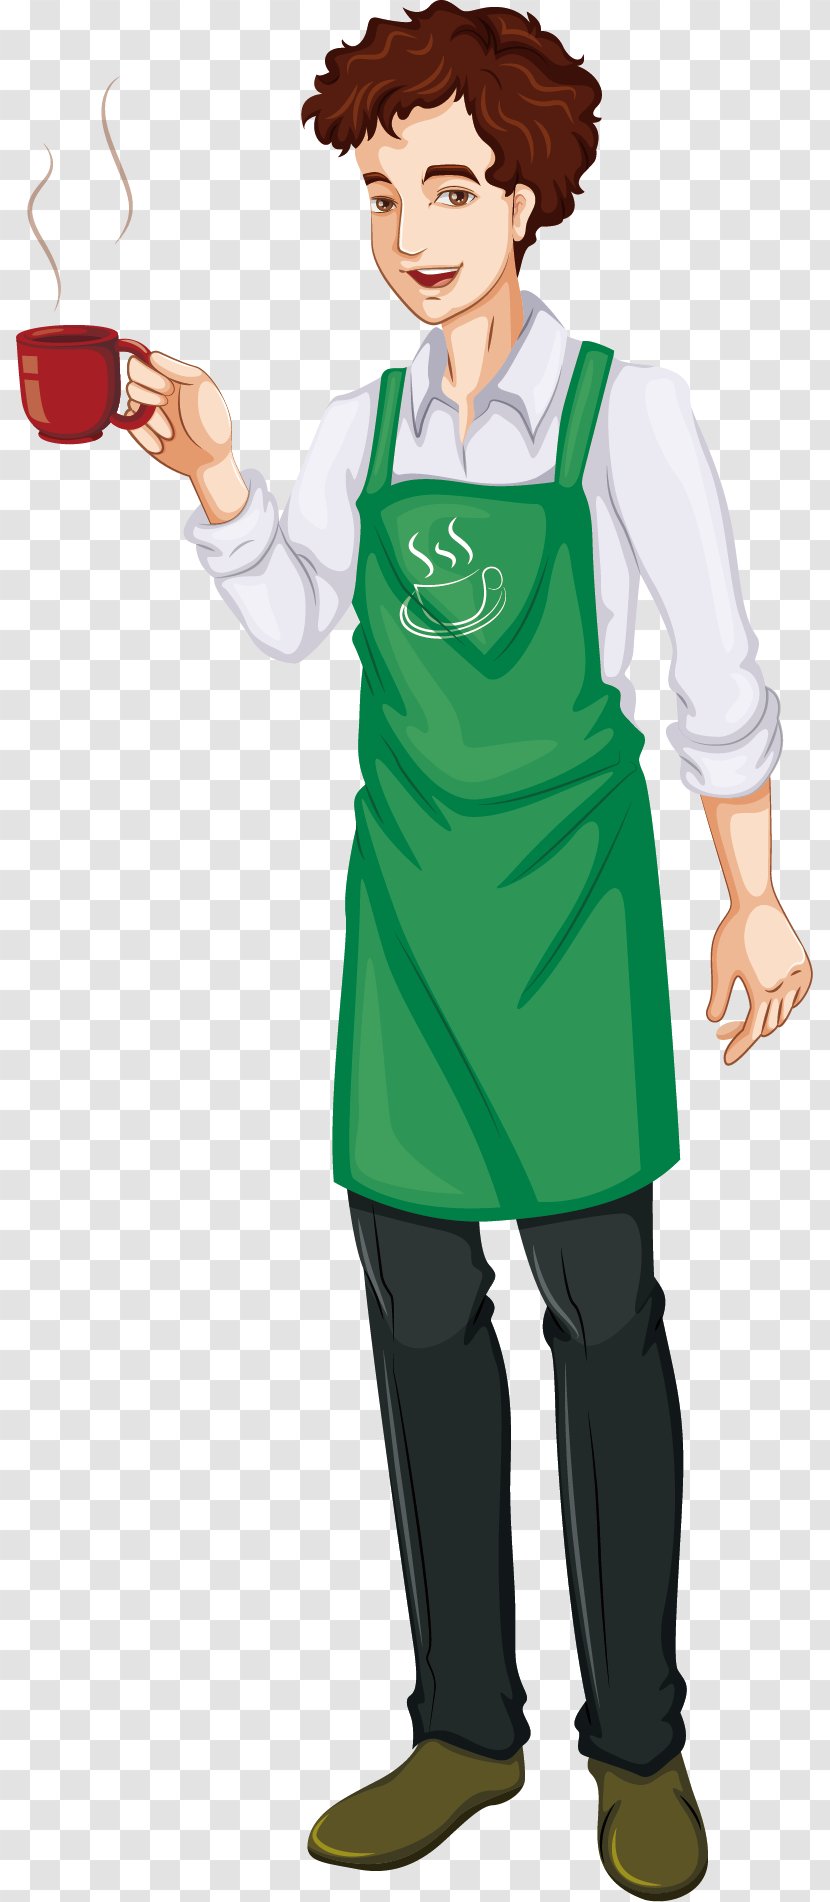 Cafe Drawing Waiter Illustration - Flower - The Man Who Pours Coffee Transparent PNG